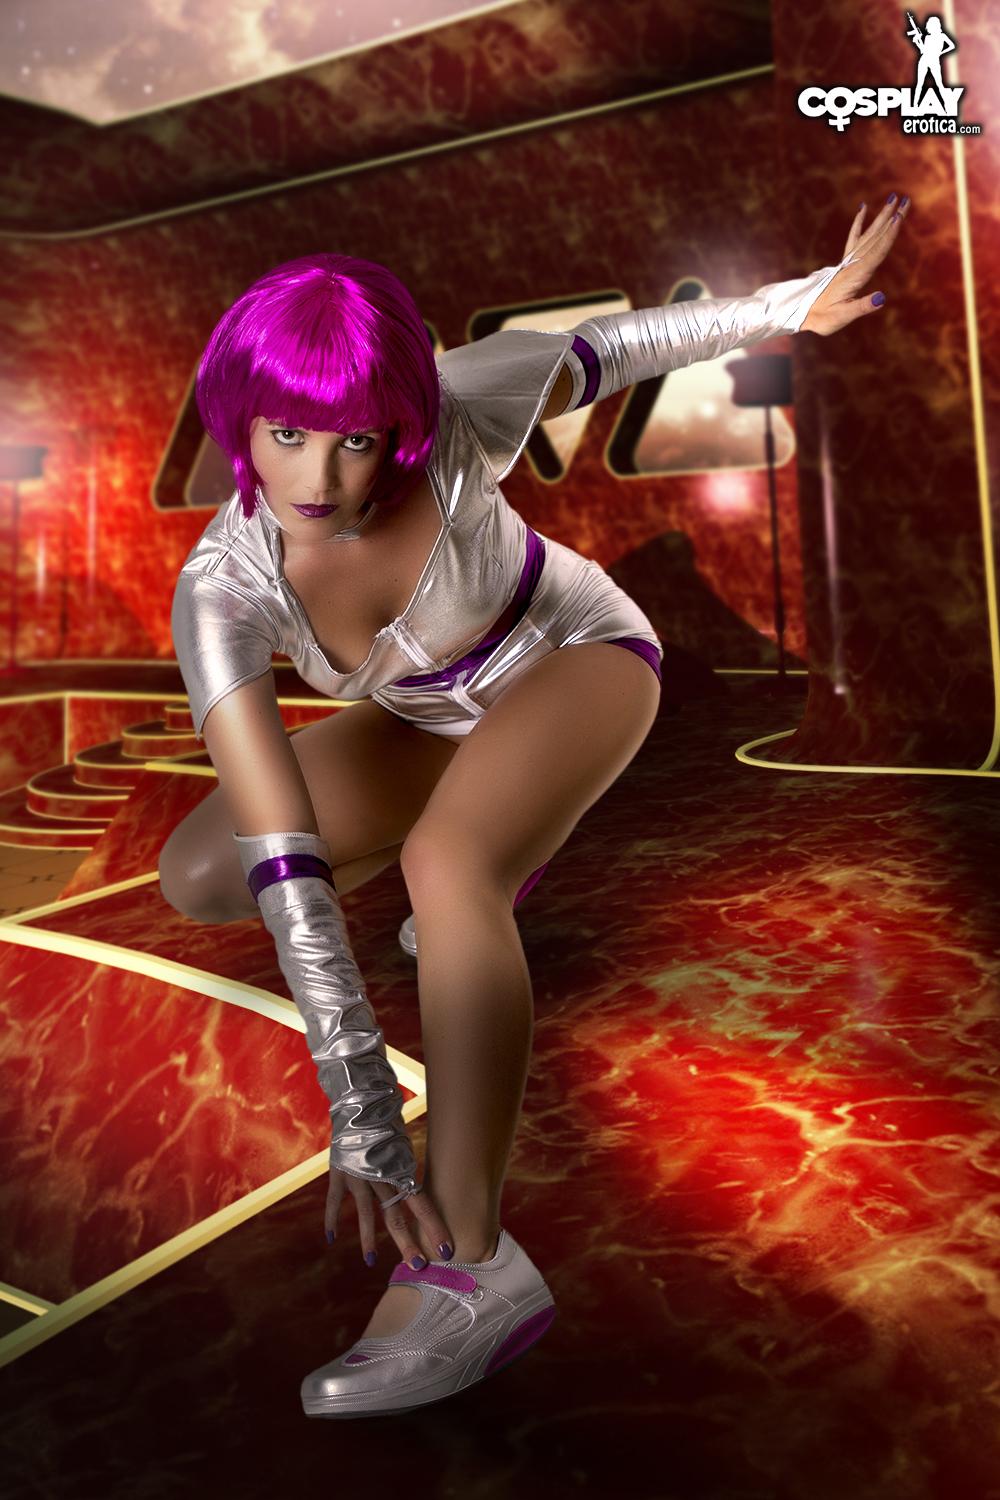 Cosplay hottie gogo expose son corps chaud dans le costume
 #54560155